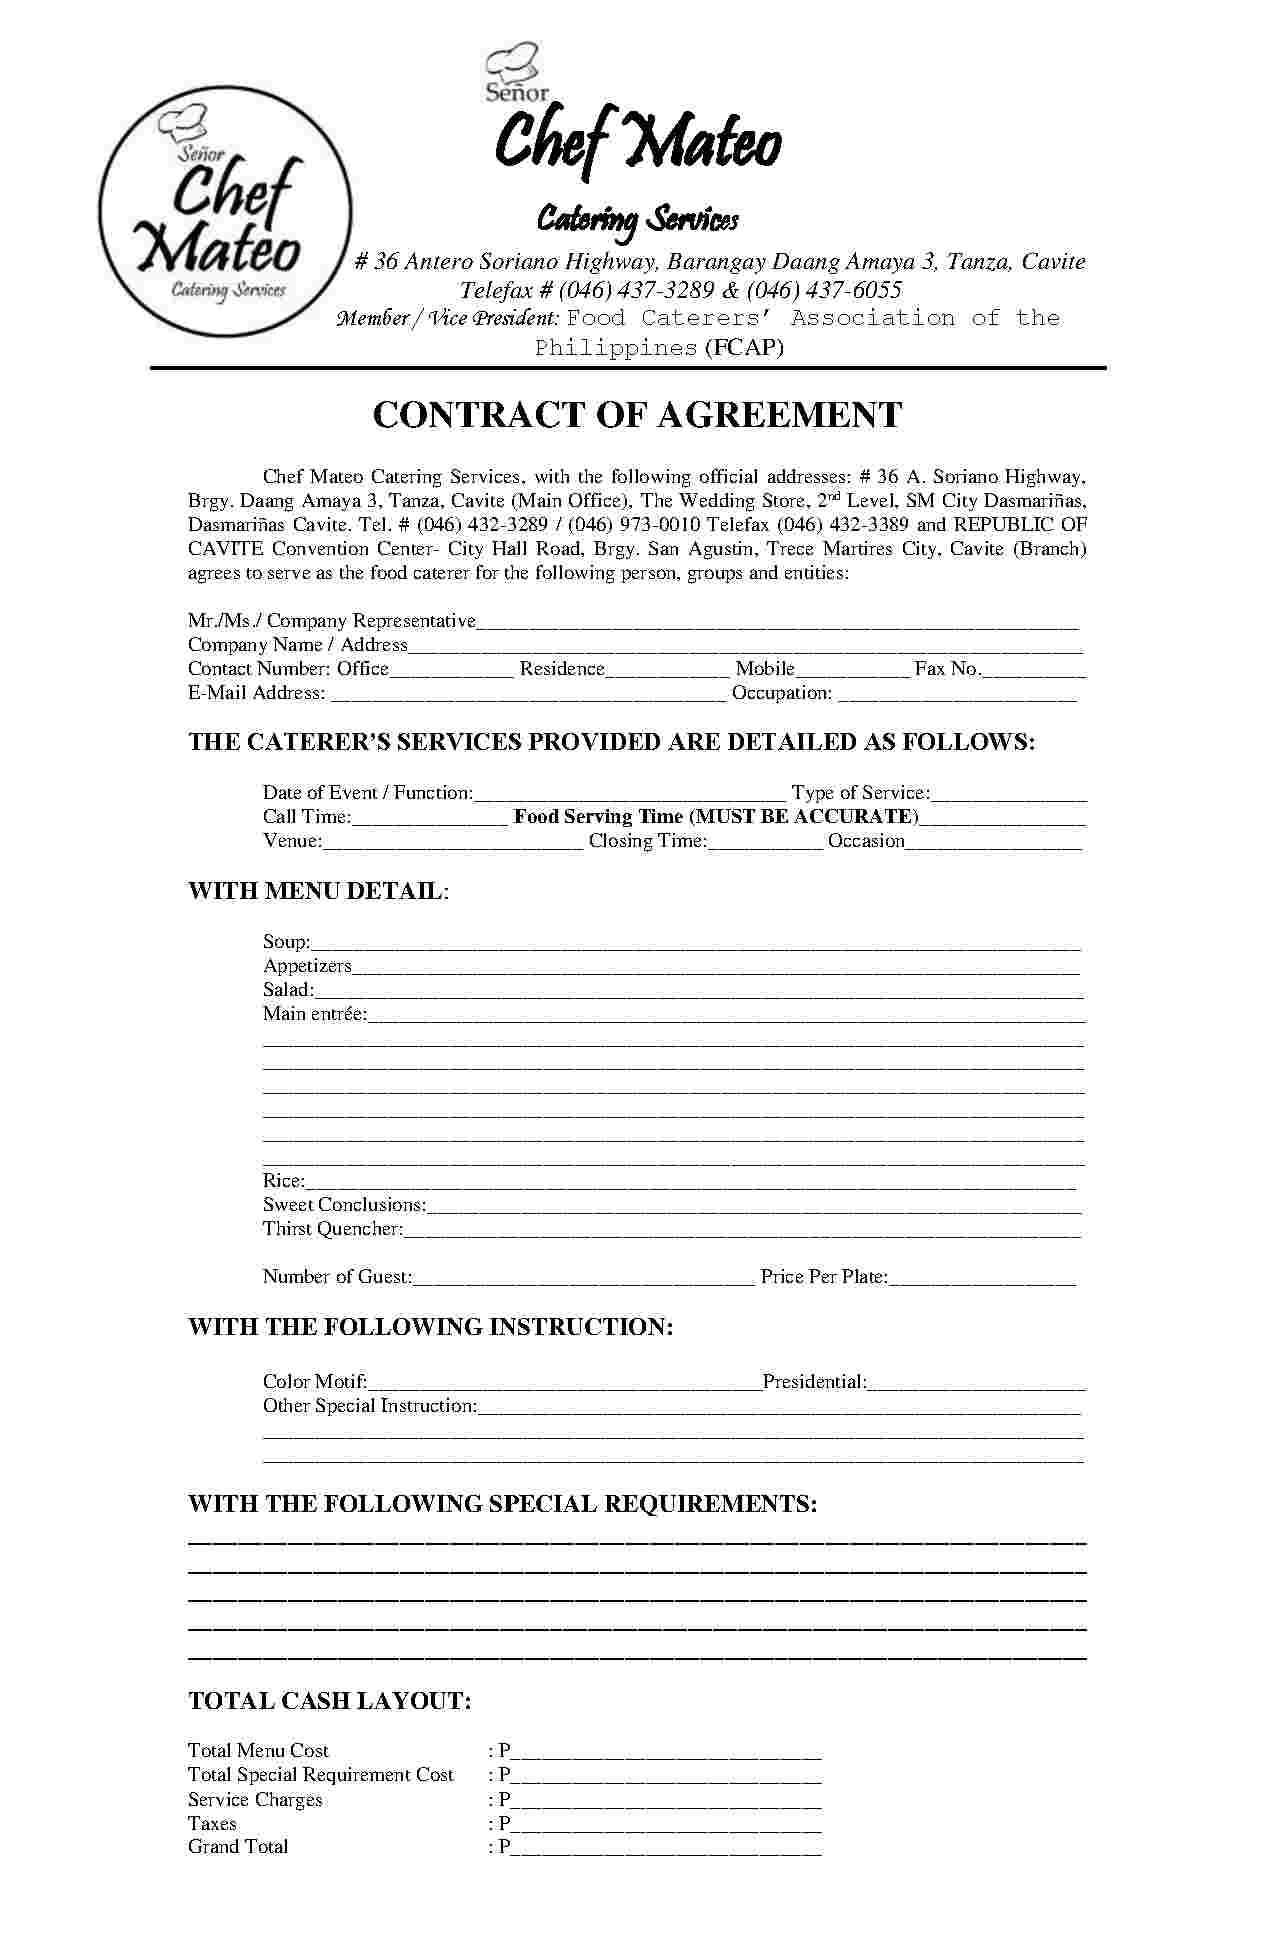 Download Catering Contract Style 5 Template For Free At Regarding Catering Contract Template Word